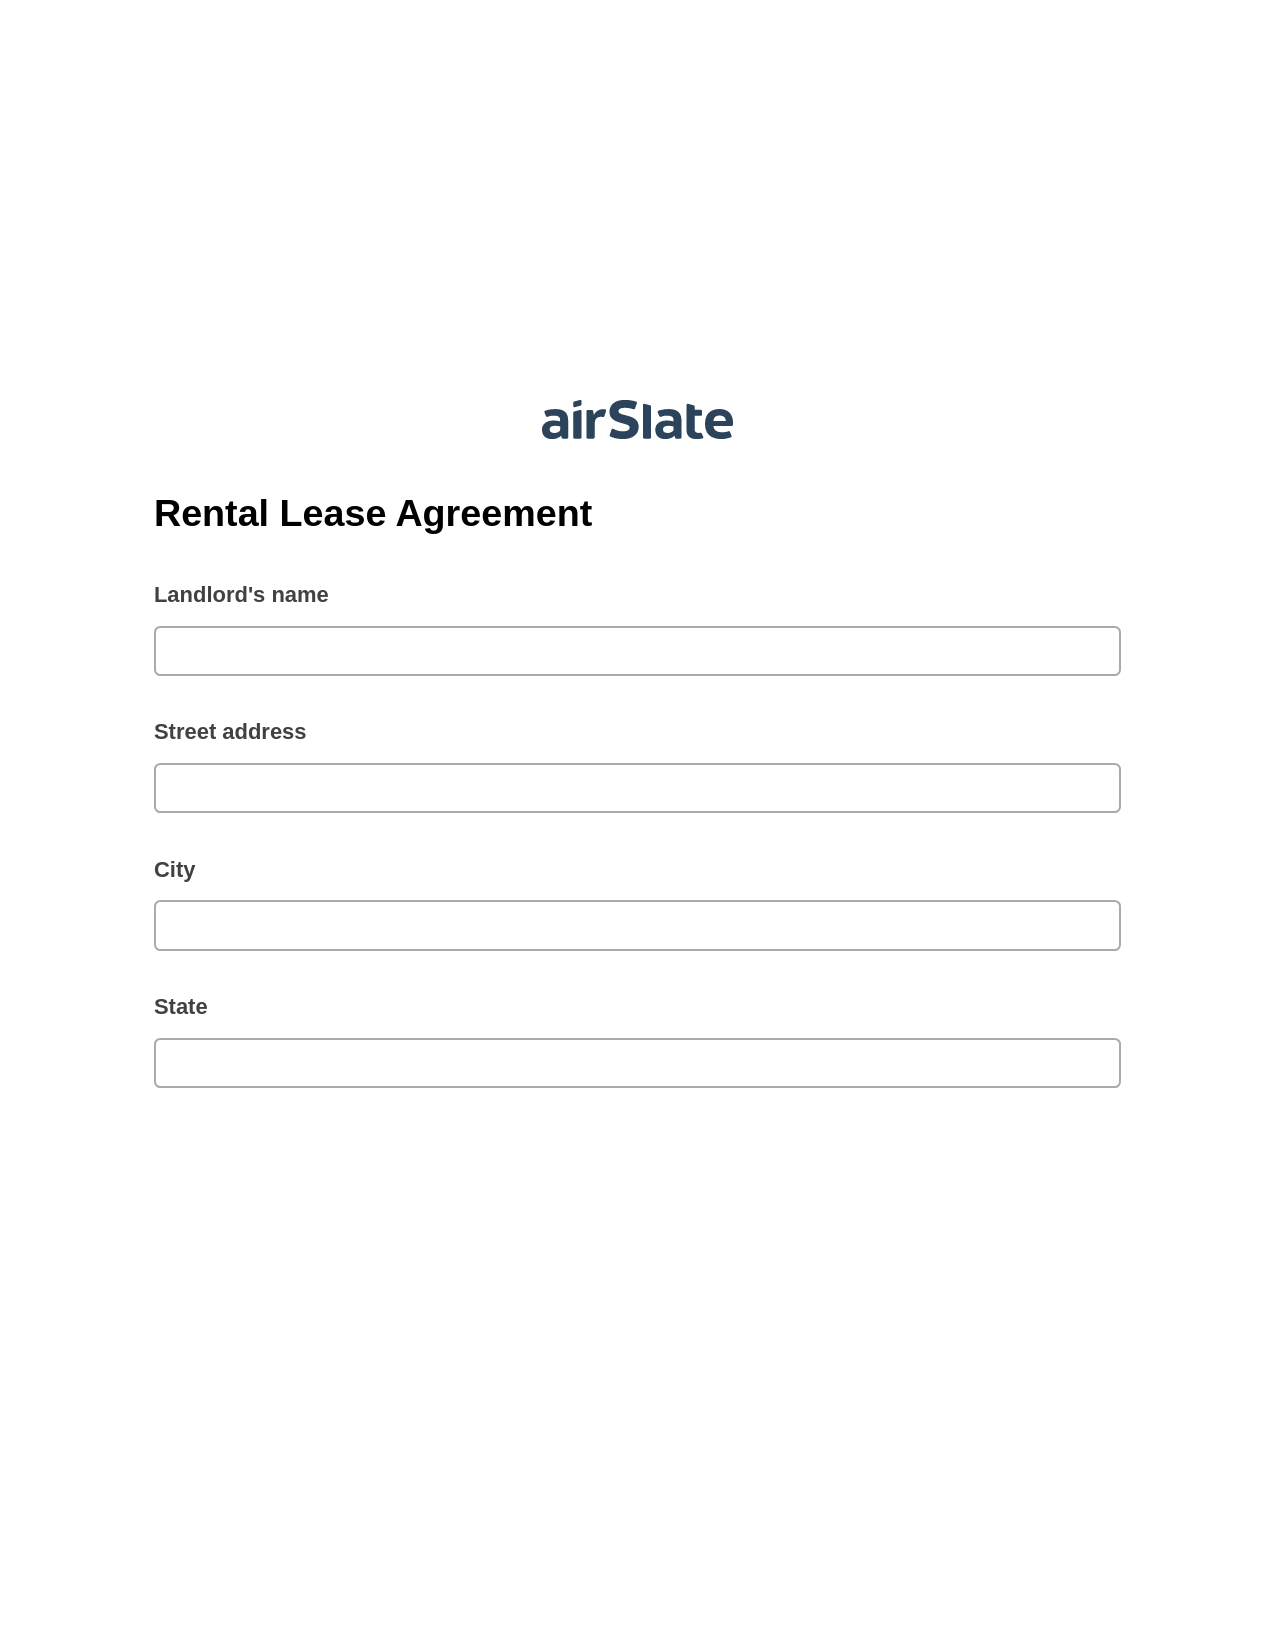 Rental Lease Agreement System Bot - Slack Two-Way Binding Bot, Create NetSuite Records Bot, Archive to SharePoint Folder Bot